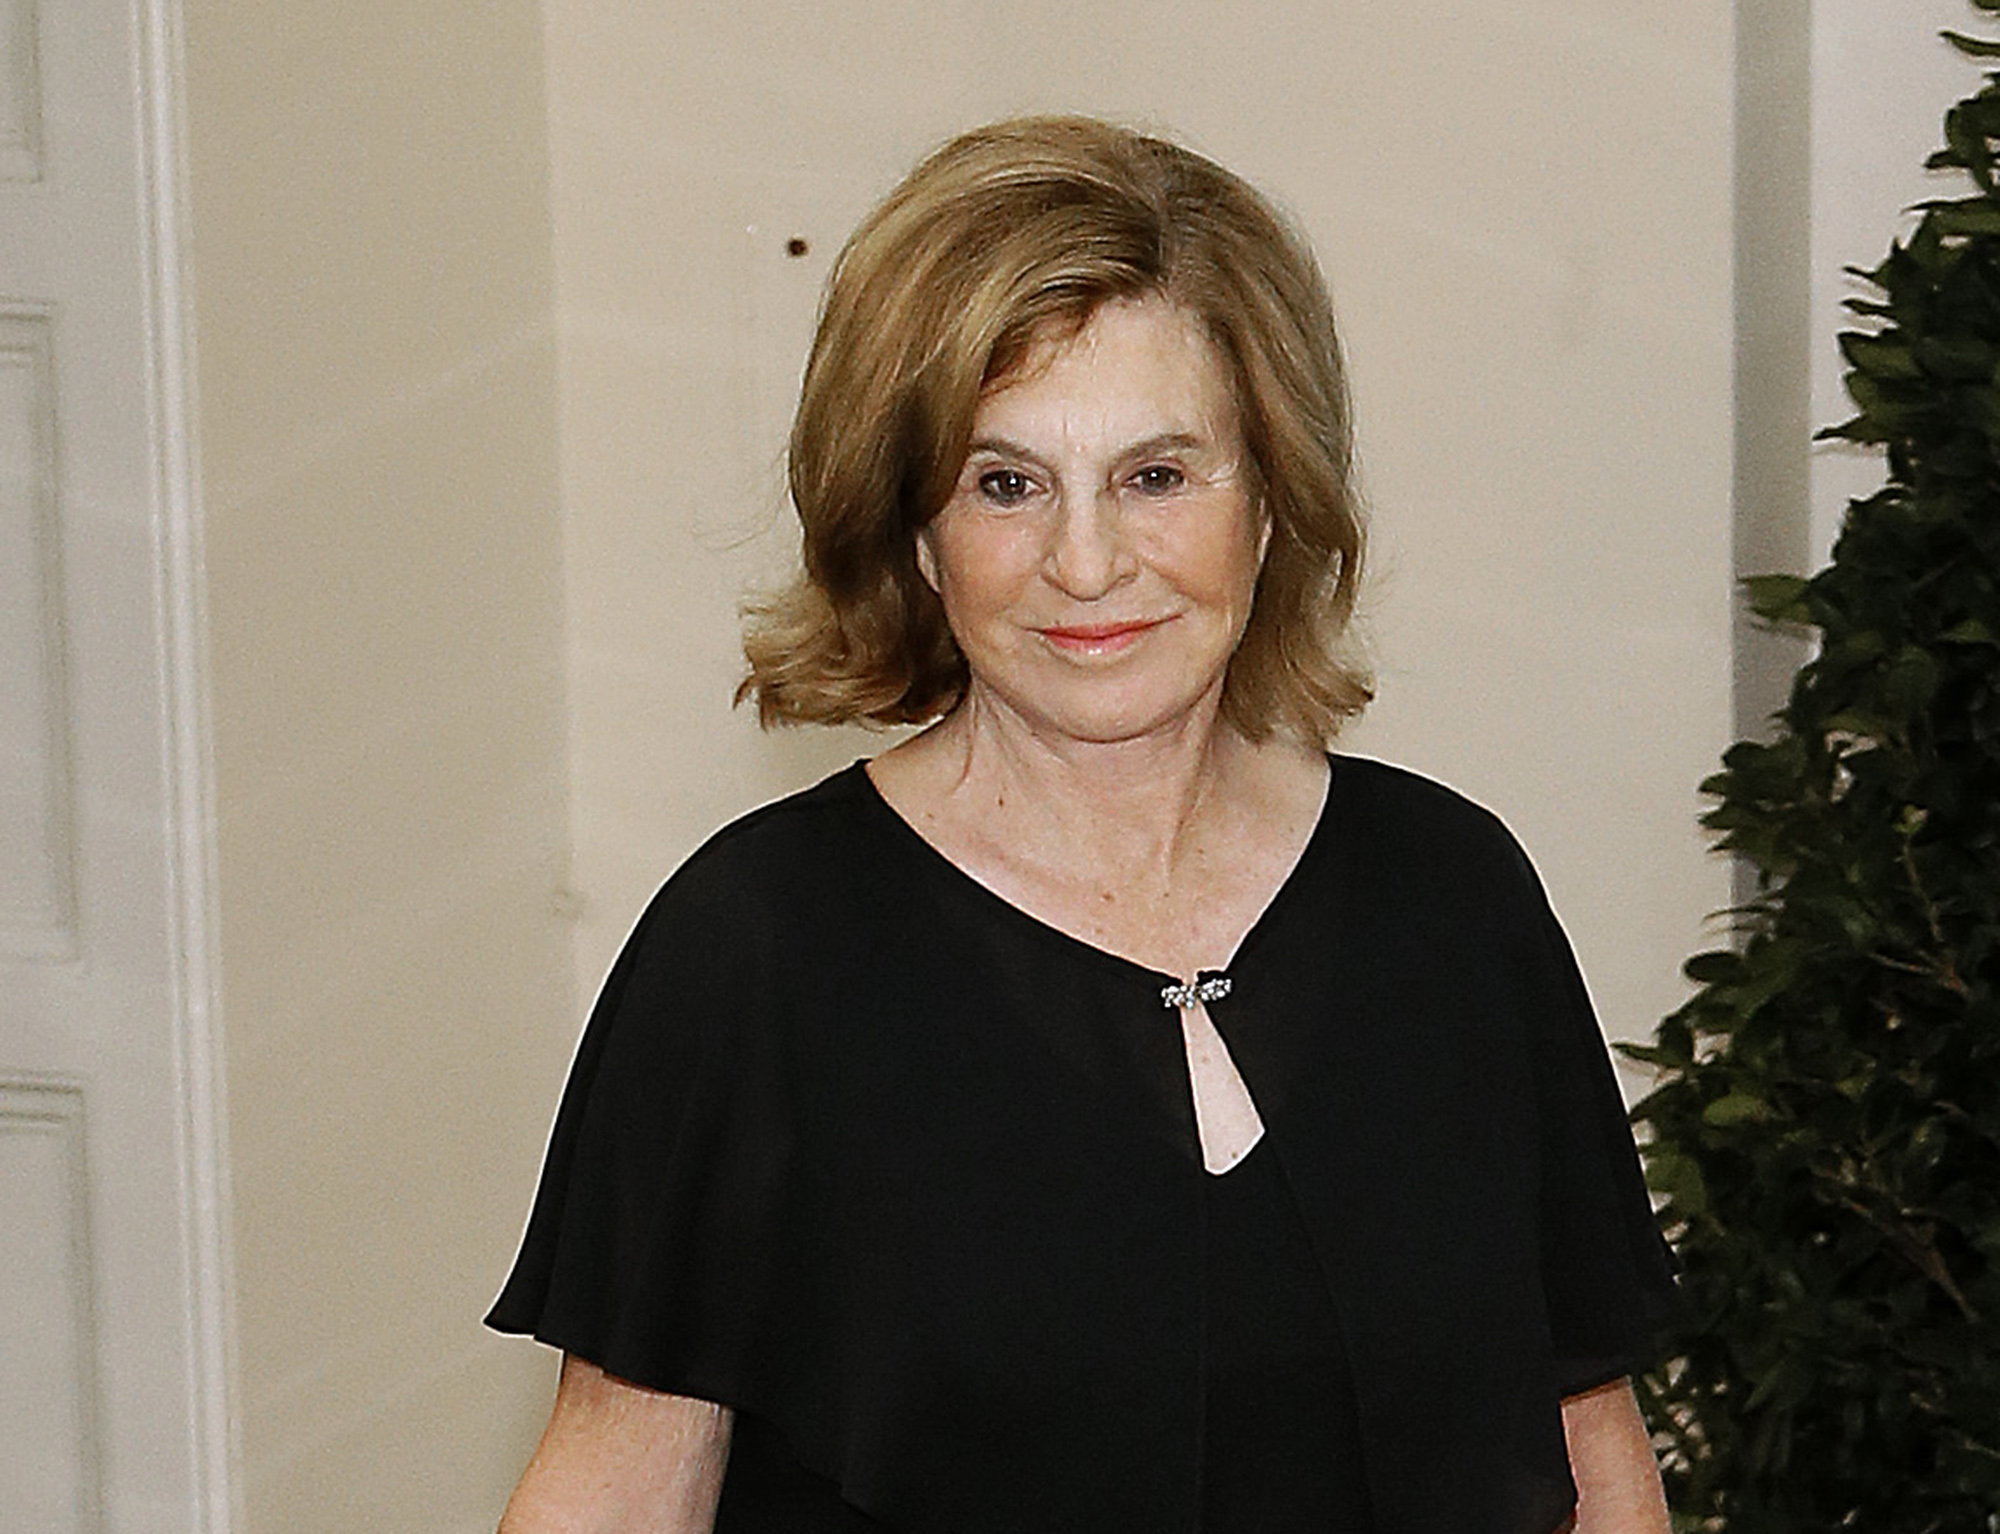 Liz Uihlein at the White House for a state dinner in 2019.